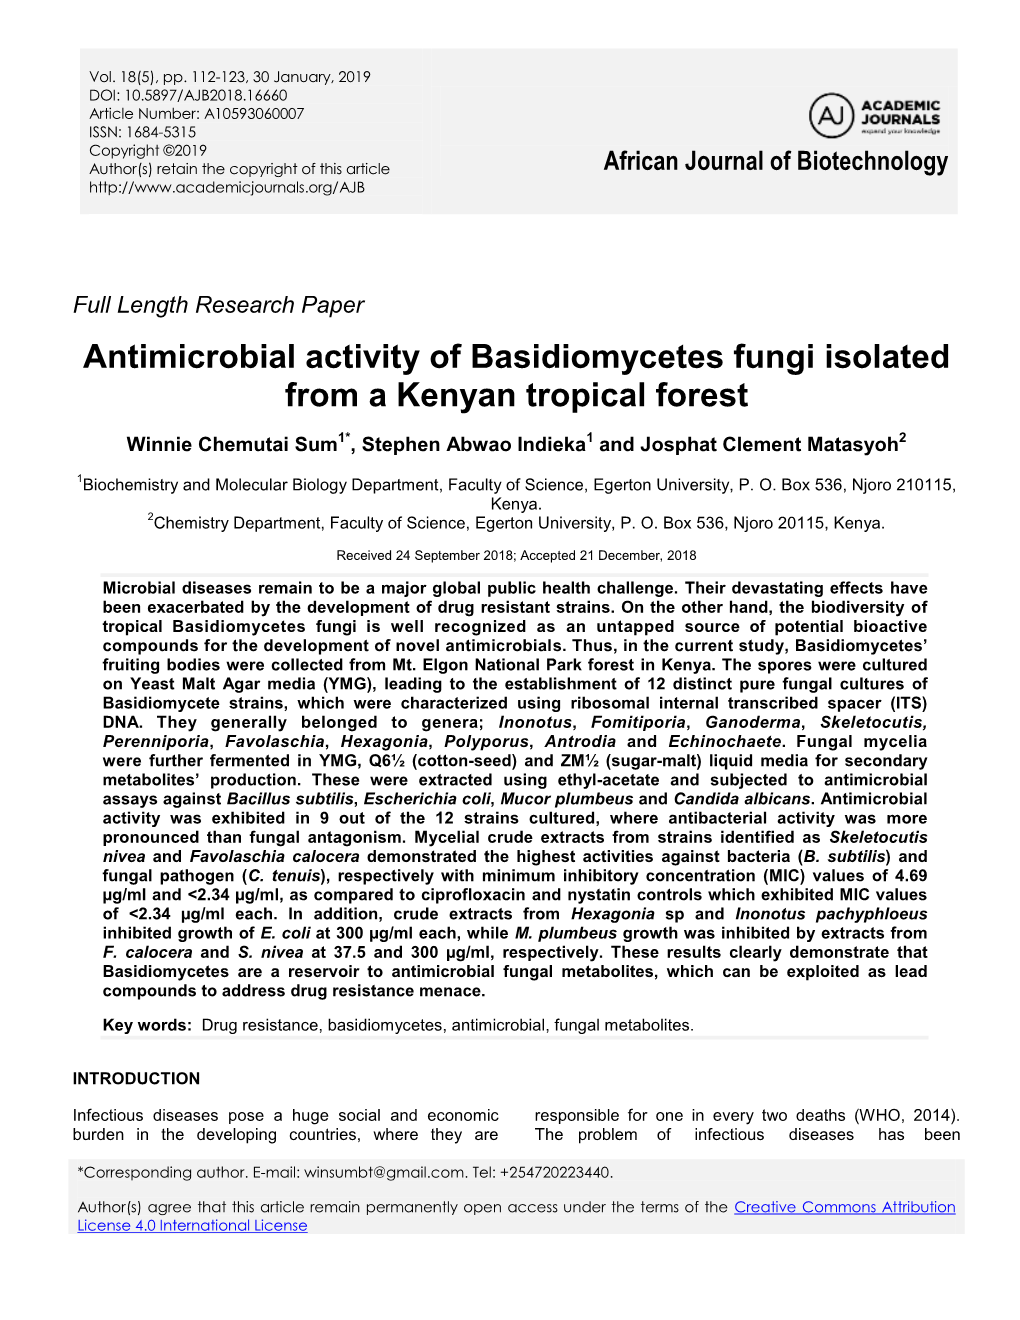 Antimicrobial Activity of Basidiomycetes Fungi Isolated from a Kenyan Tropical Forest